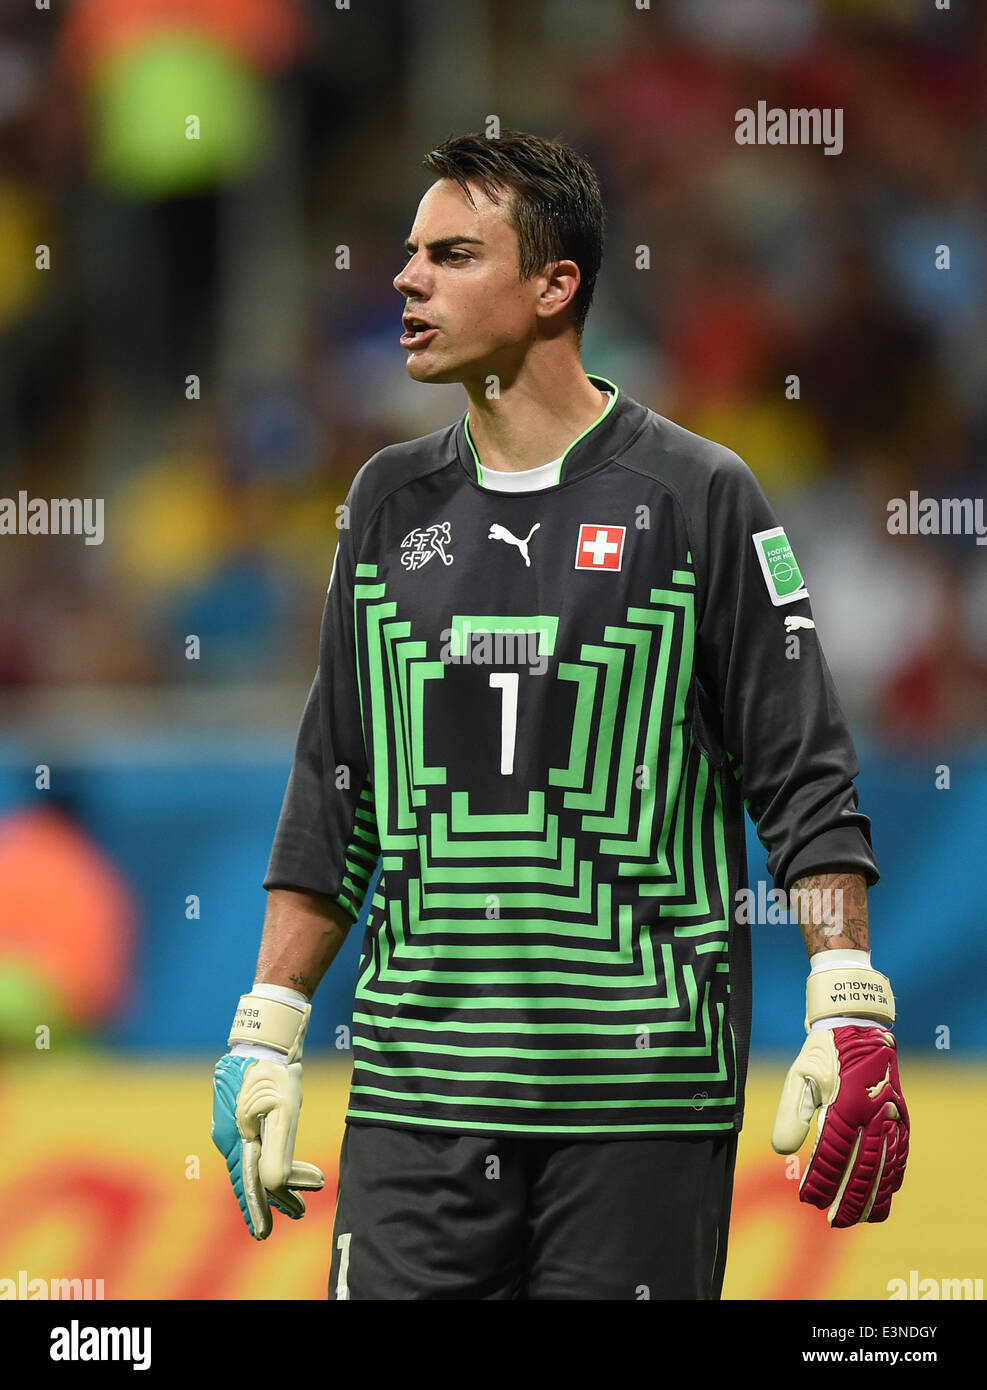 Switzerland's goal keeper Diego Benaglio in action during the FIFA World Cup 2014 group E preliminary round match between Switzerland and France at the Arena Fonte Nova Stadium in Salvador da Bahia, Brazil, 20 June 2014. Photo: Marius Becker/dpa Stock Photo